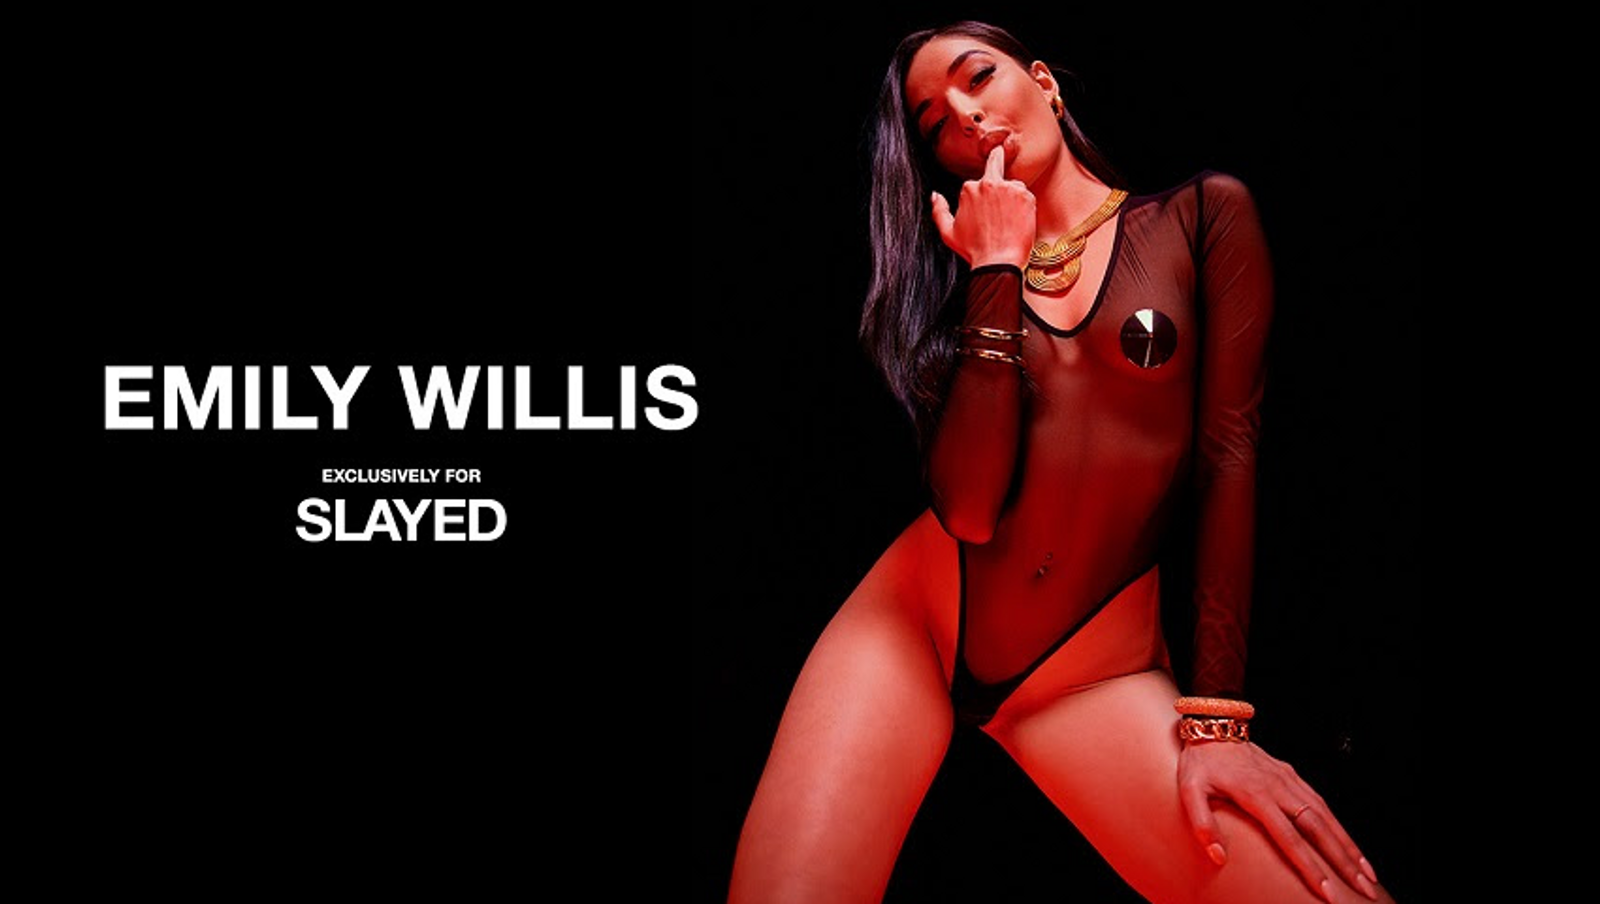 Emily Willis Signs Exclusive All-Girl Contract With Slayed